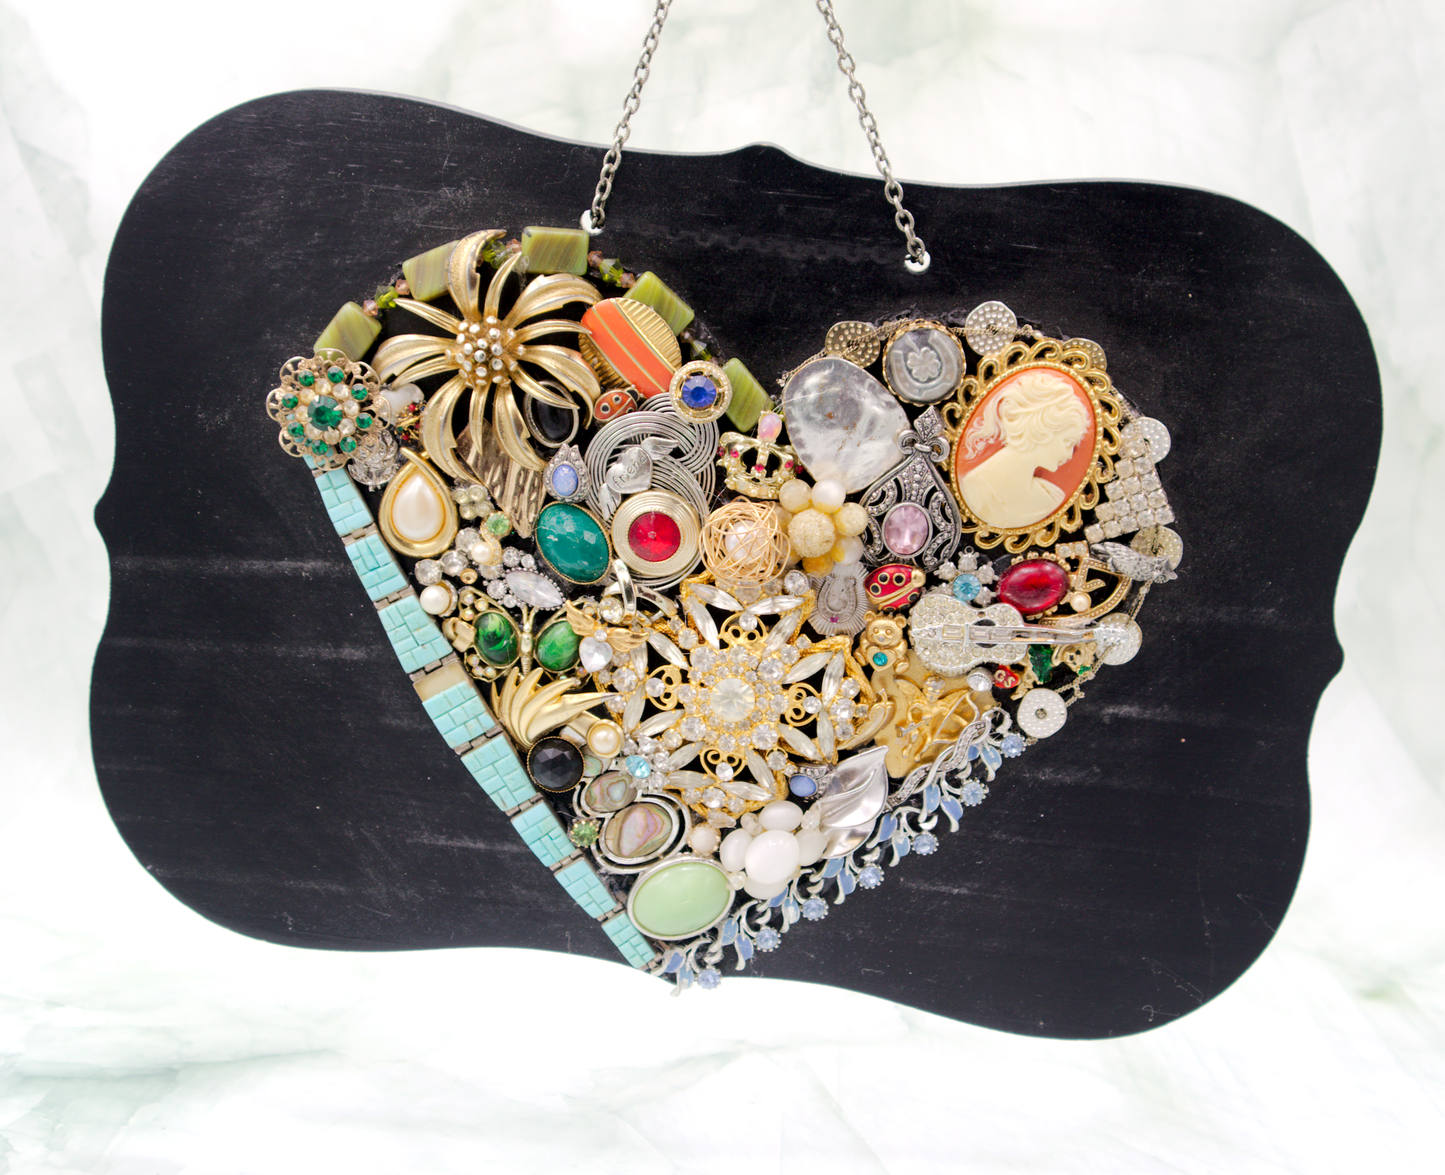 Heart Reclaimed Jewelry Sign With Chain - Approx. 5"x7"